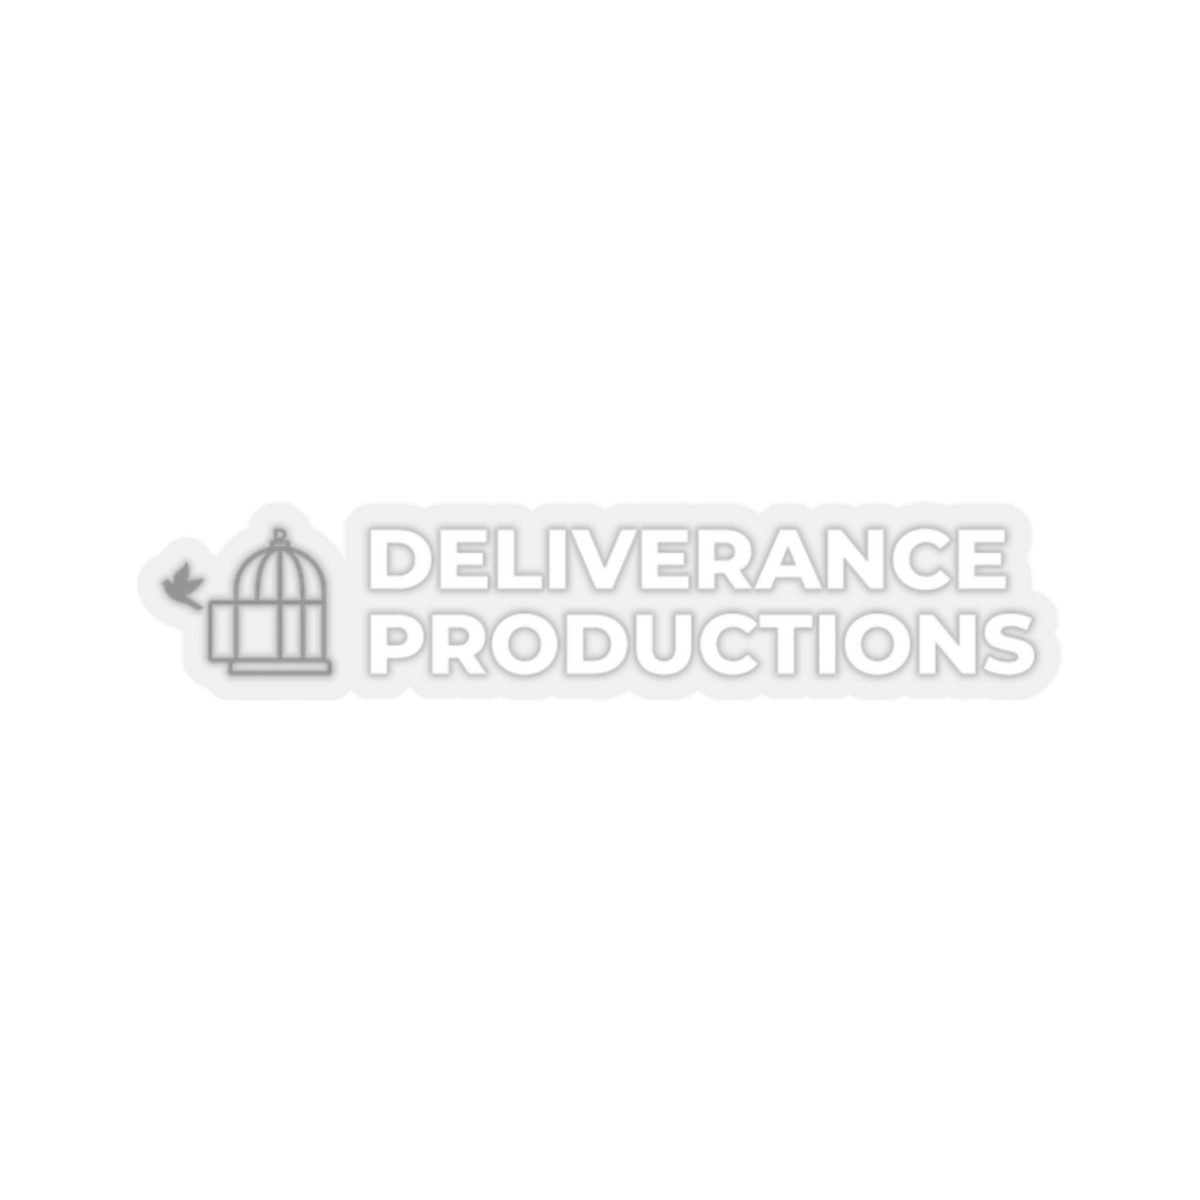 Deliverance Productions Logo Die Cut Stickers (White)